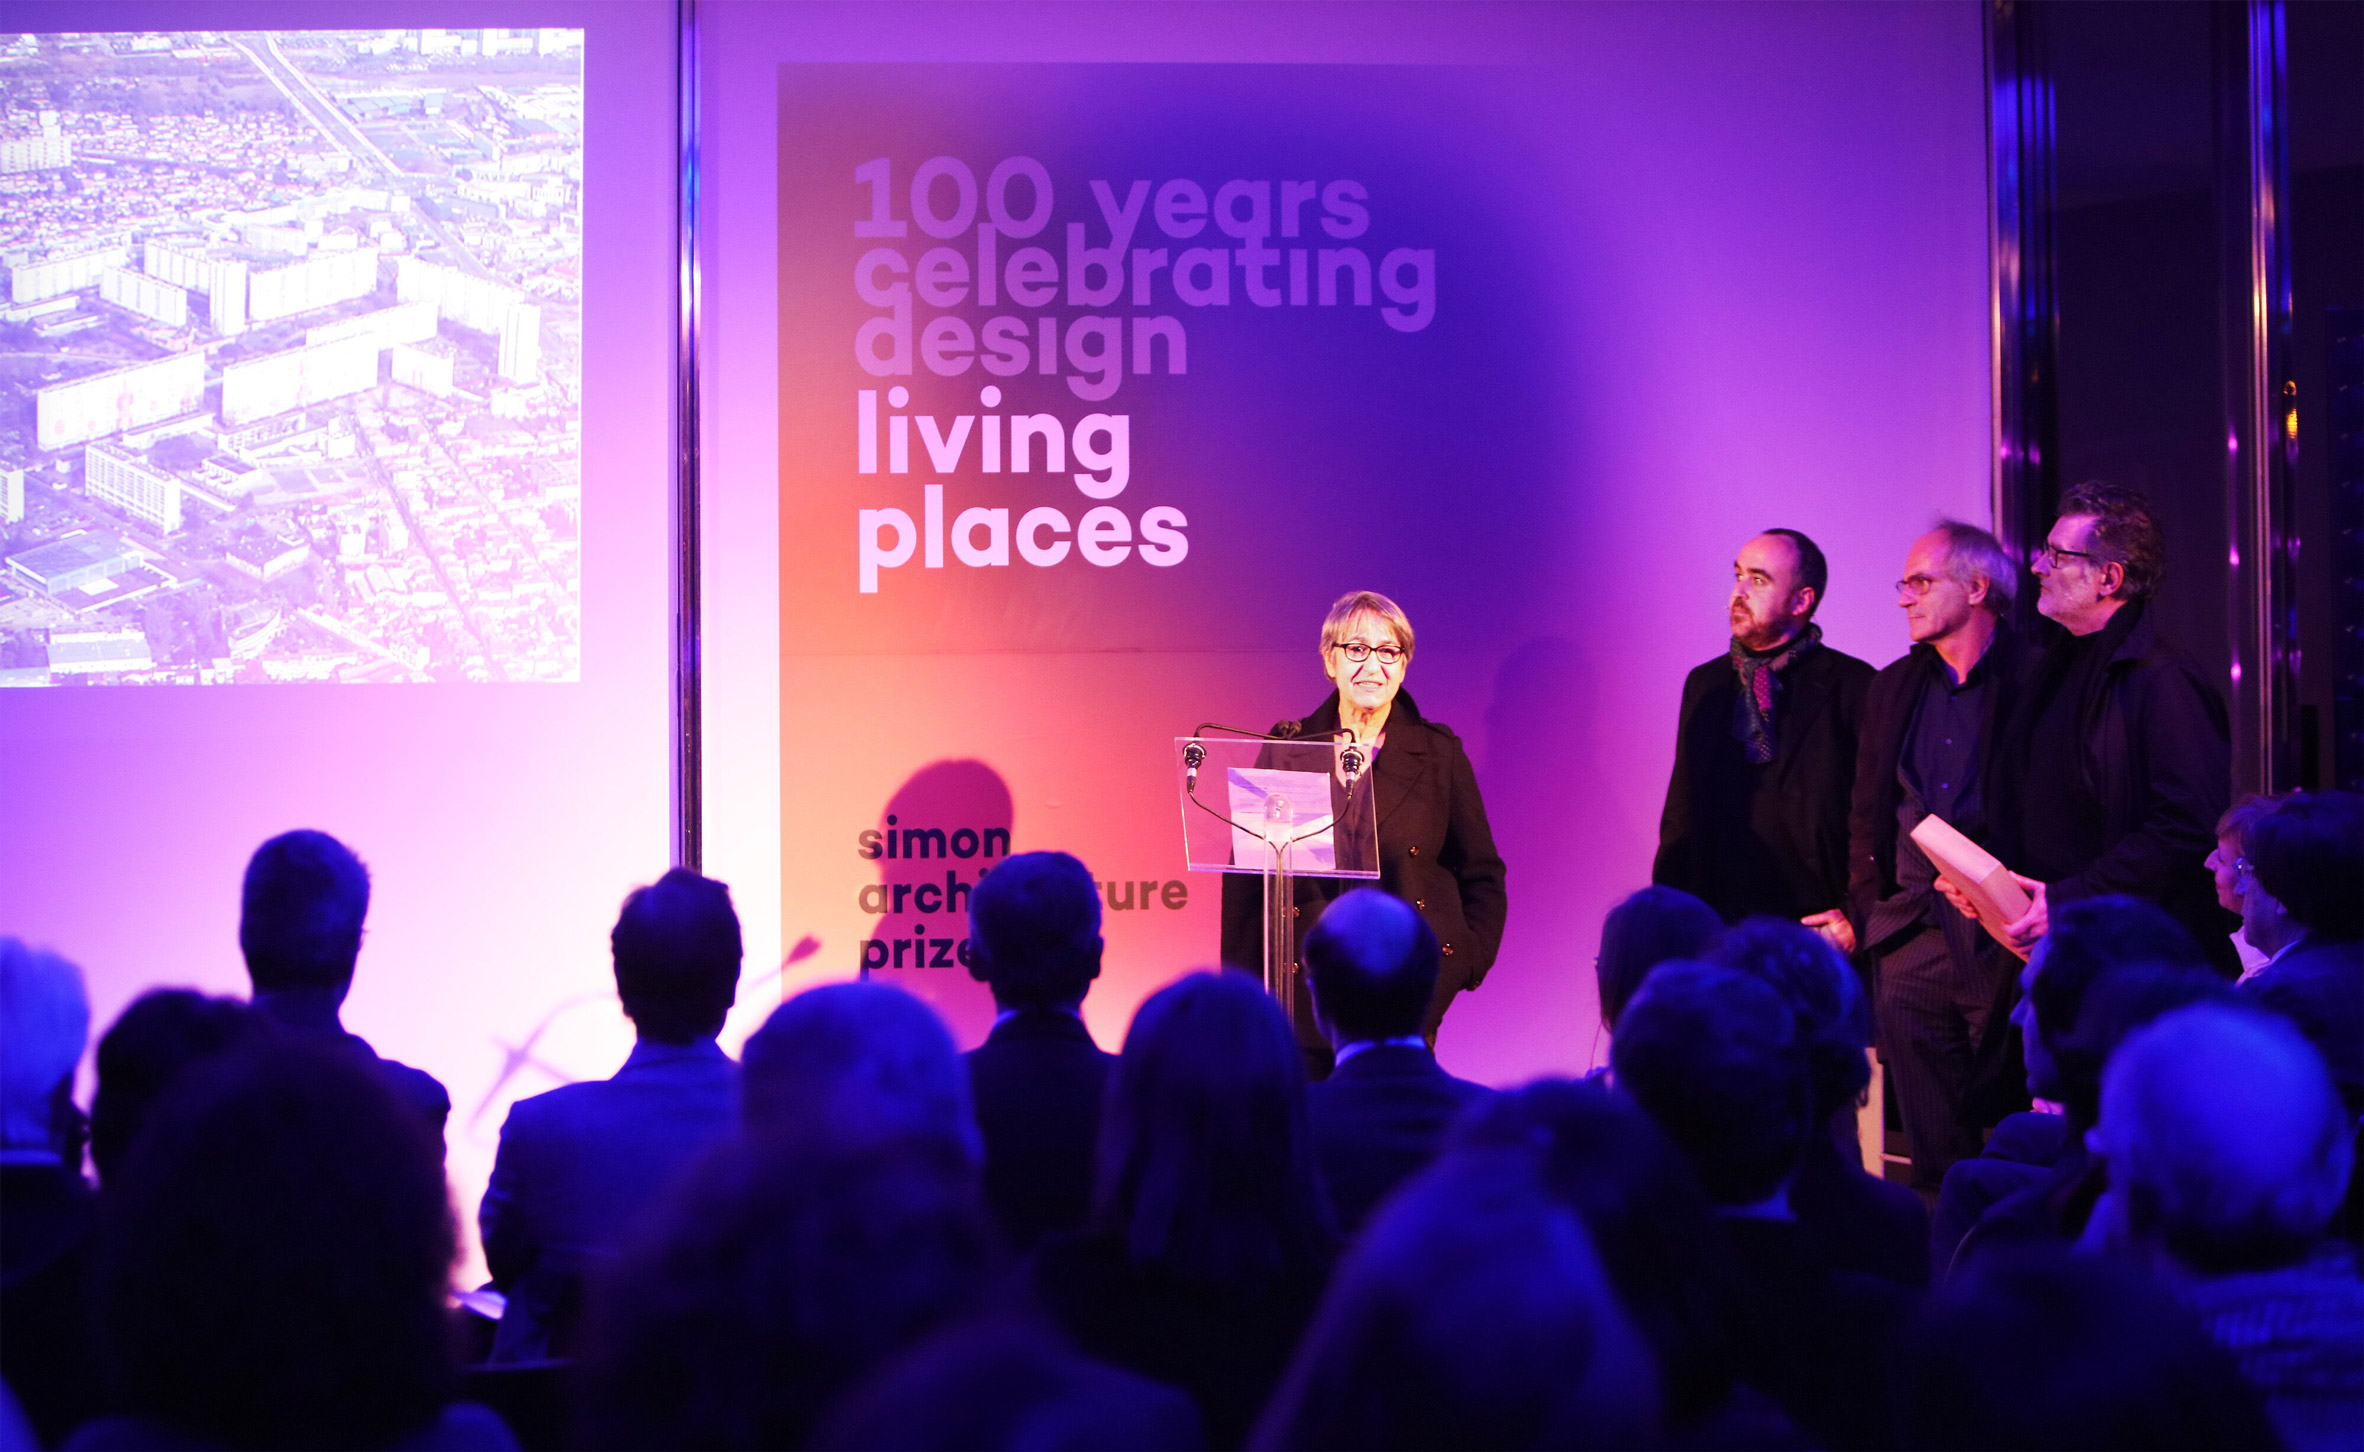 Simon Architecture Prize opens entries for Living Places 2020 awards